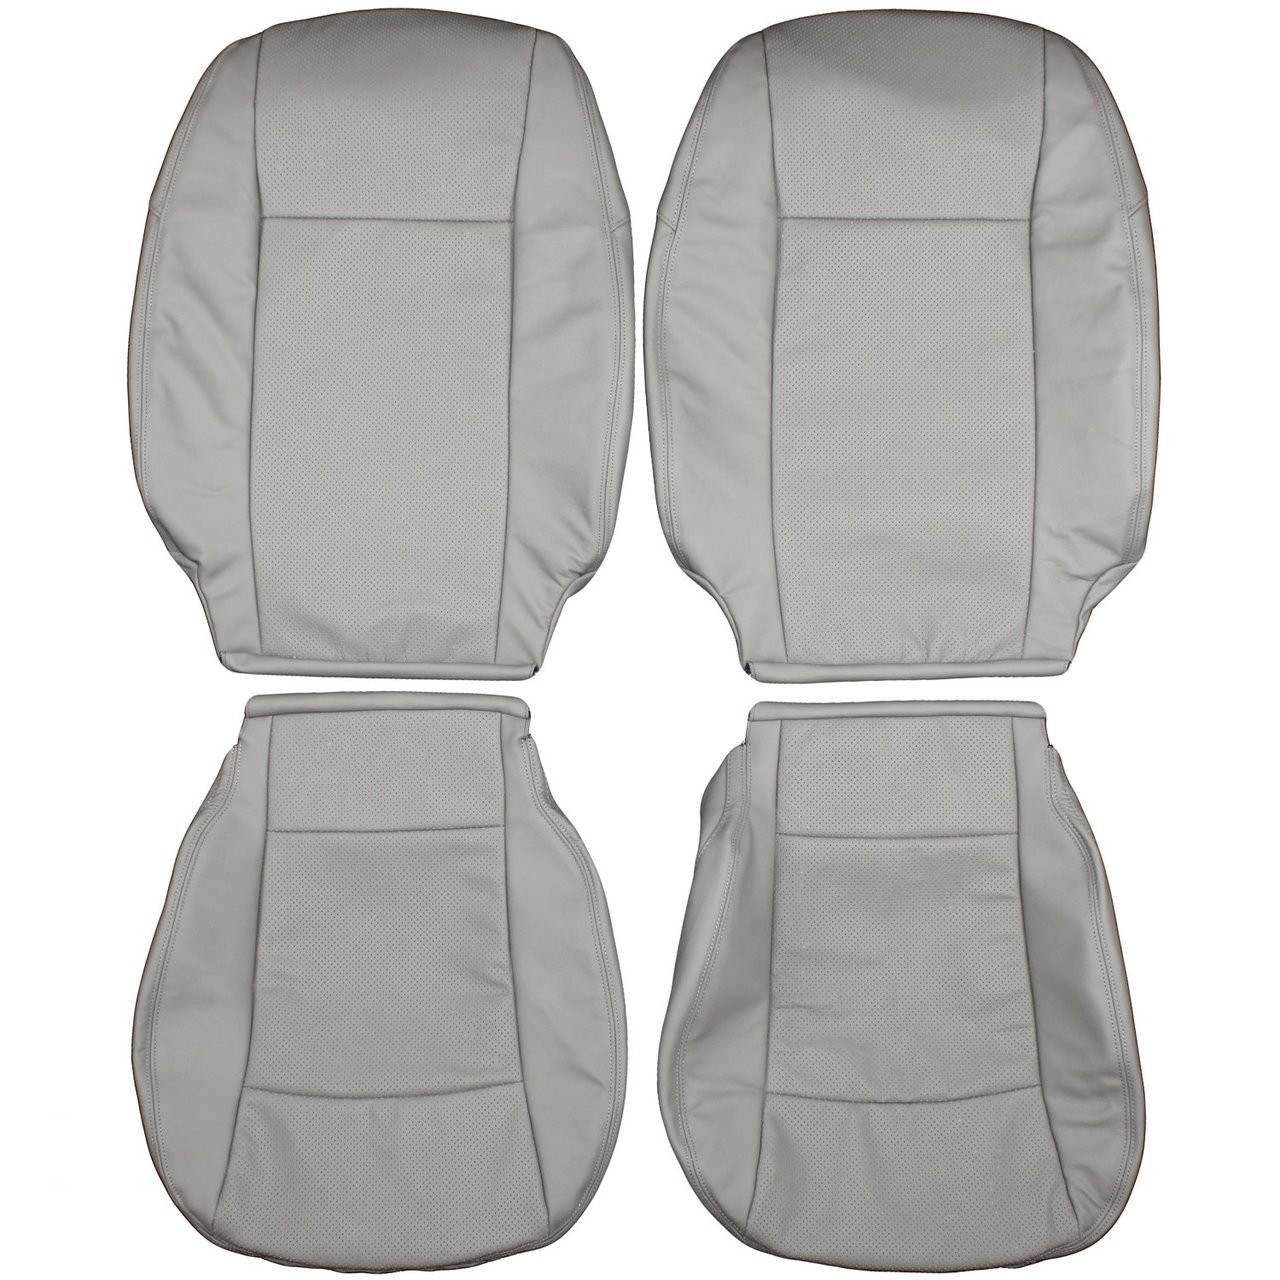 2003-2011 Saab 9-3 Custom Real Leather Seat Covers (Front) - Lseat.com